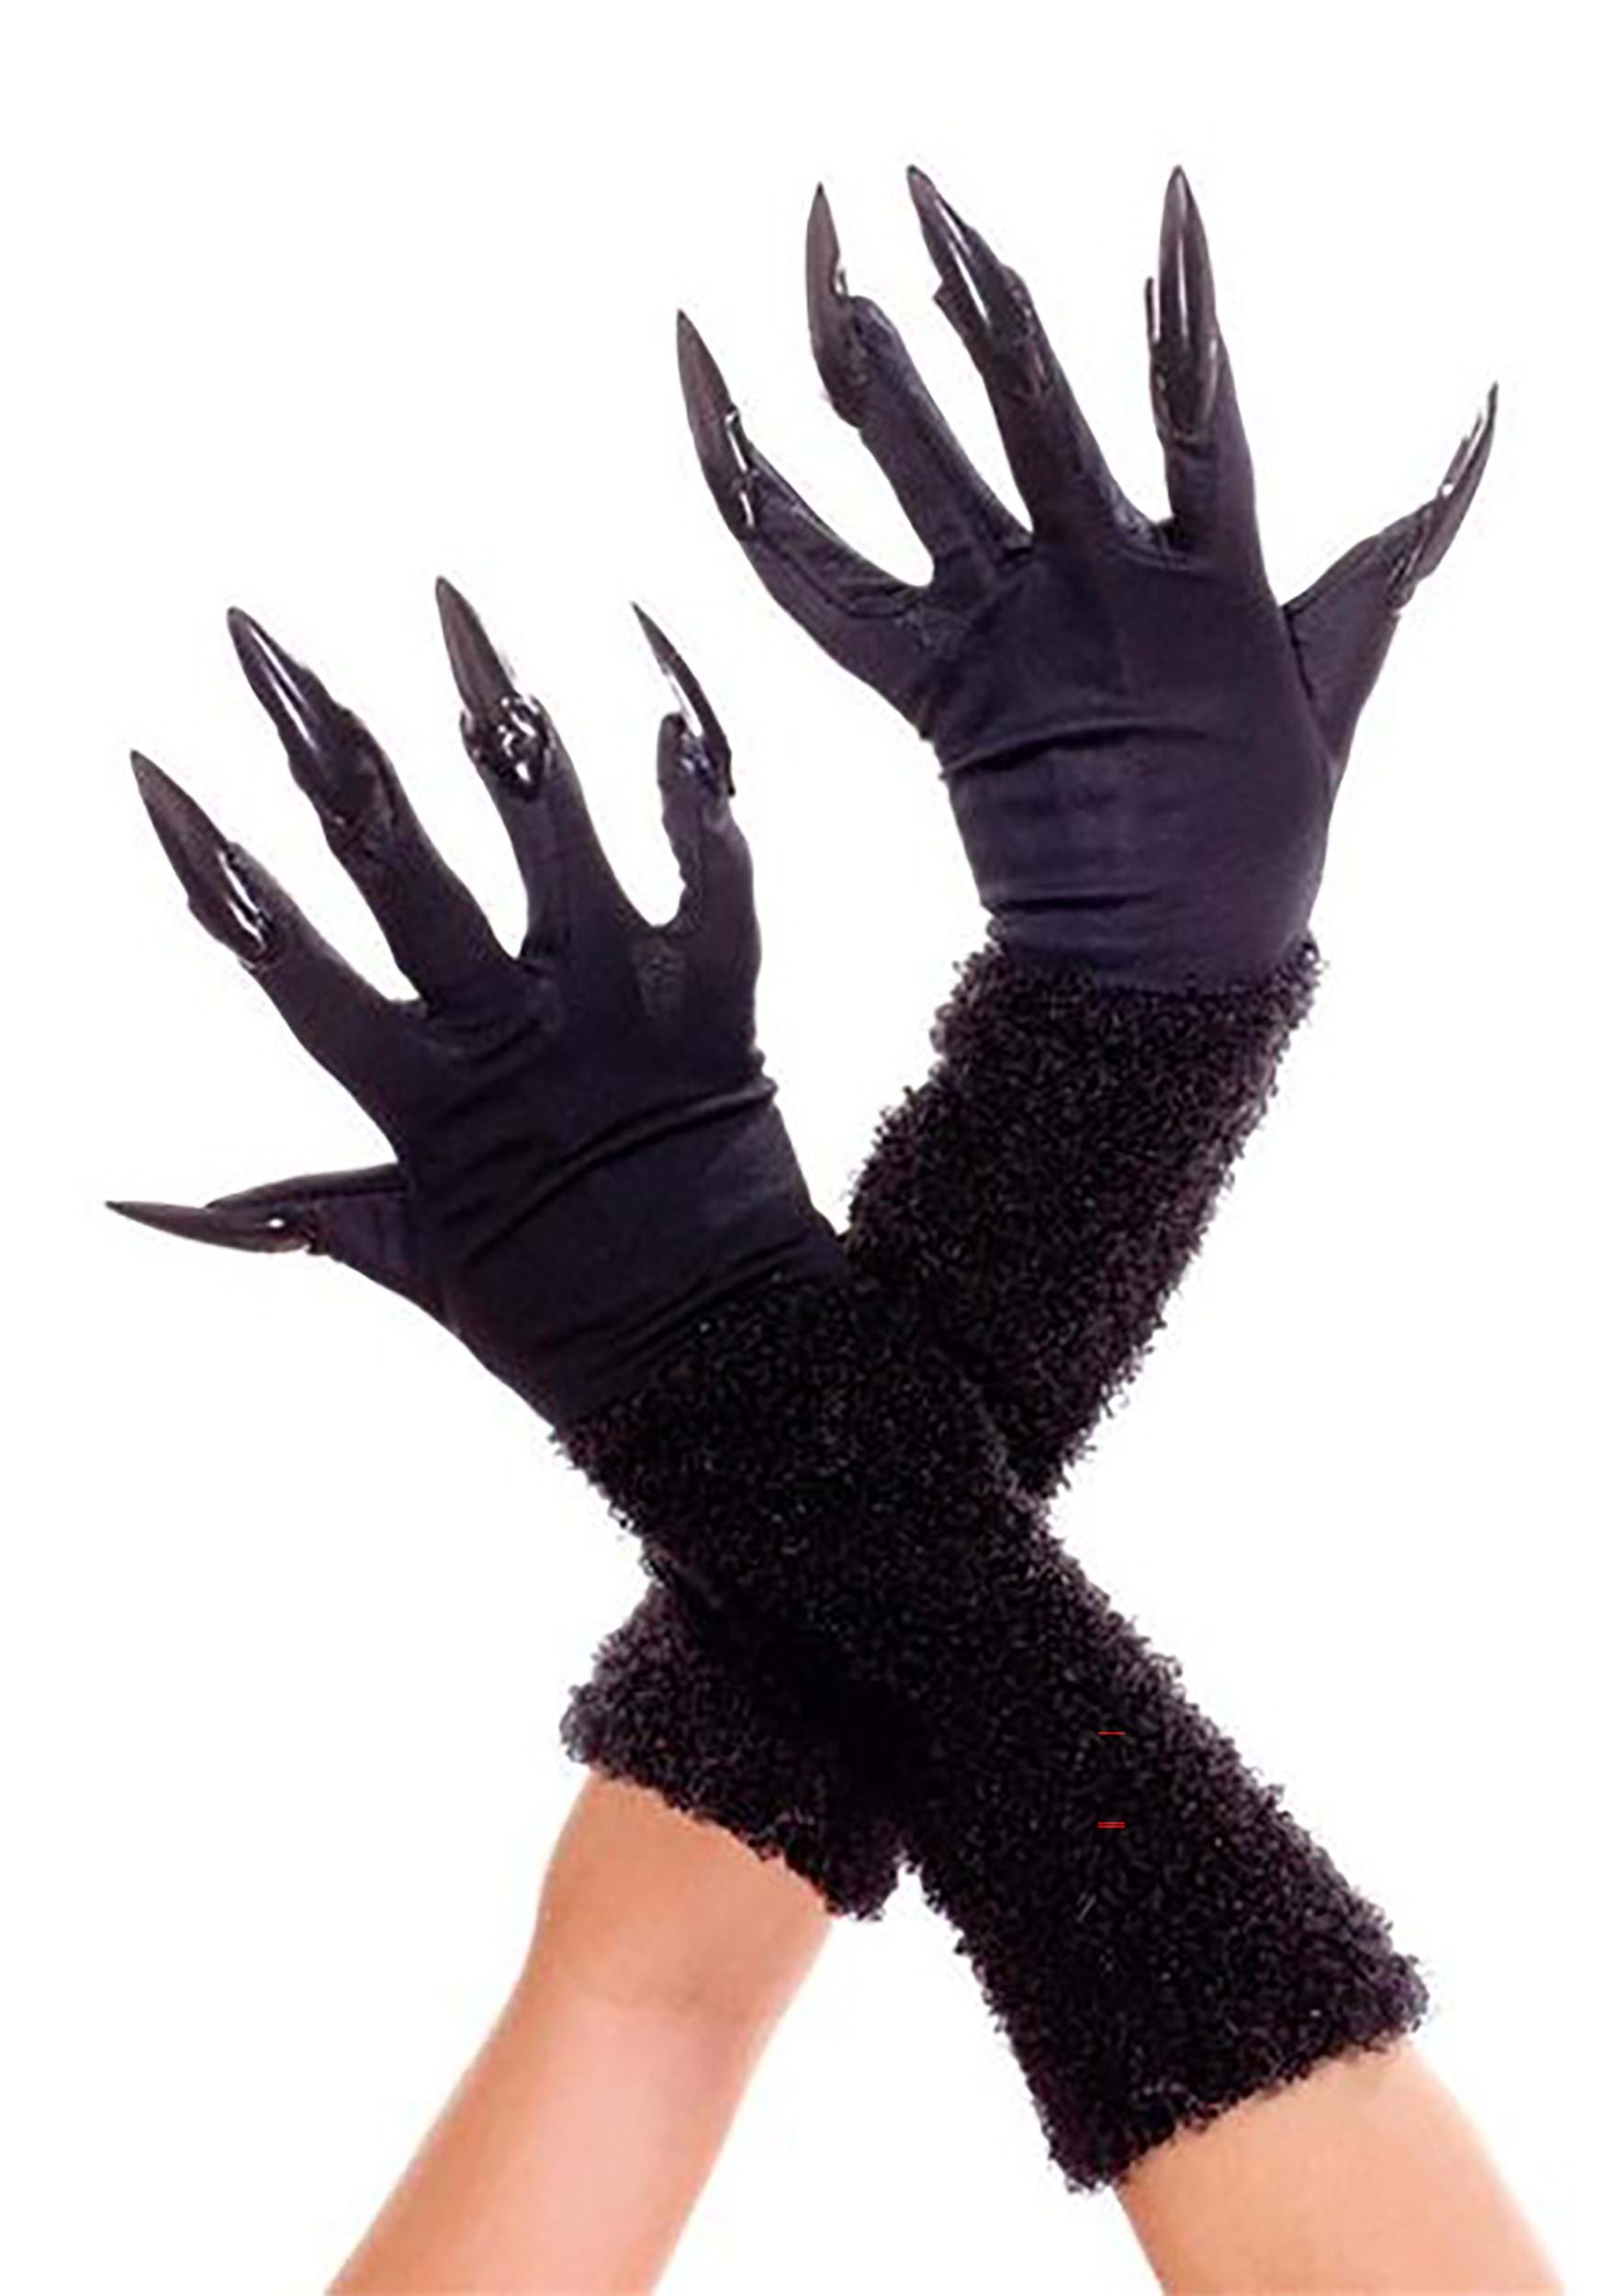 Black Furry Gloves With Nails For Women , Costume Gloves